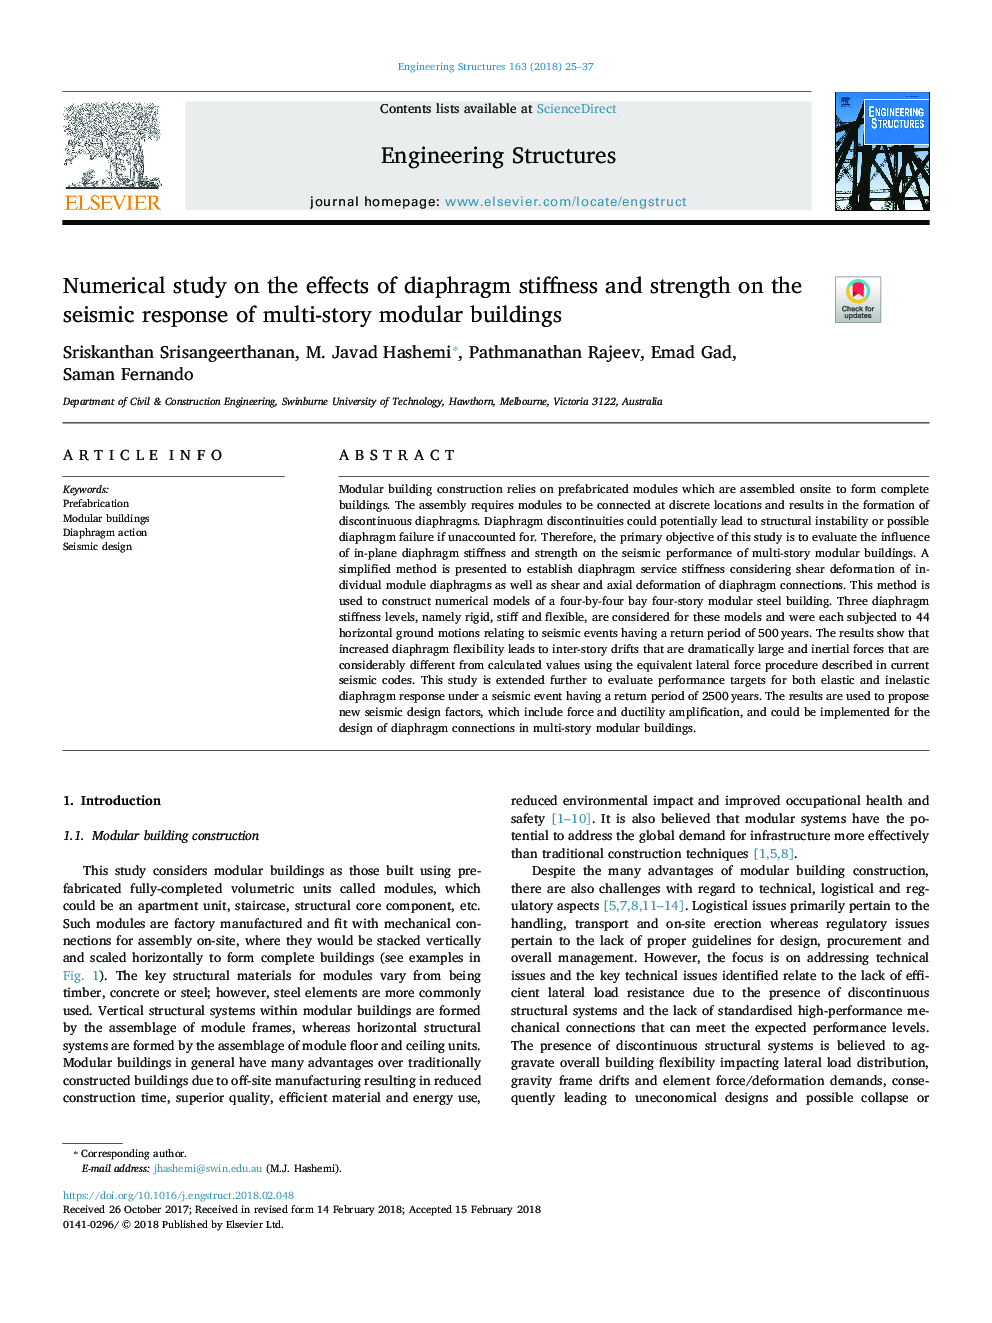 Numerical study on the effects of diaphragm stiffness and strength on the seismic response of multi-story modular buildings